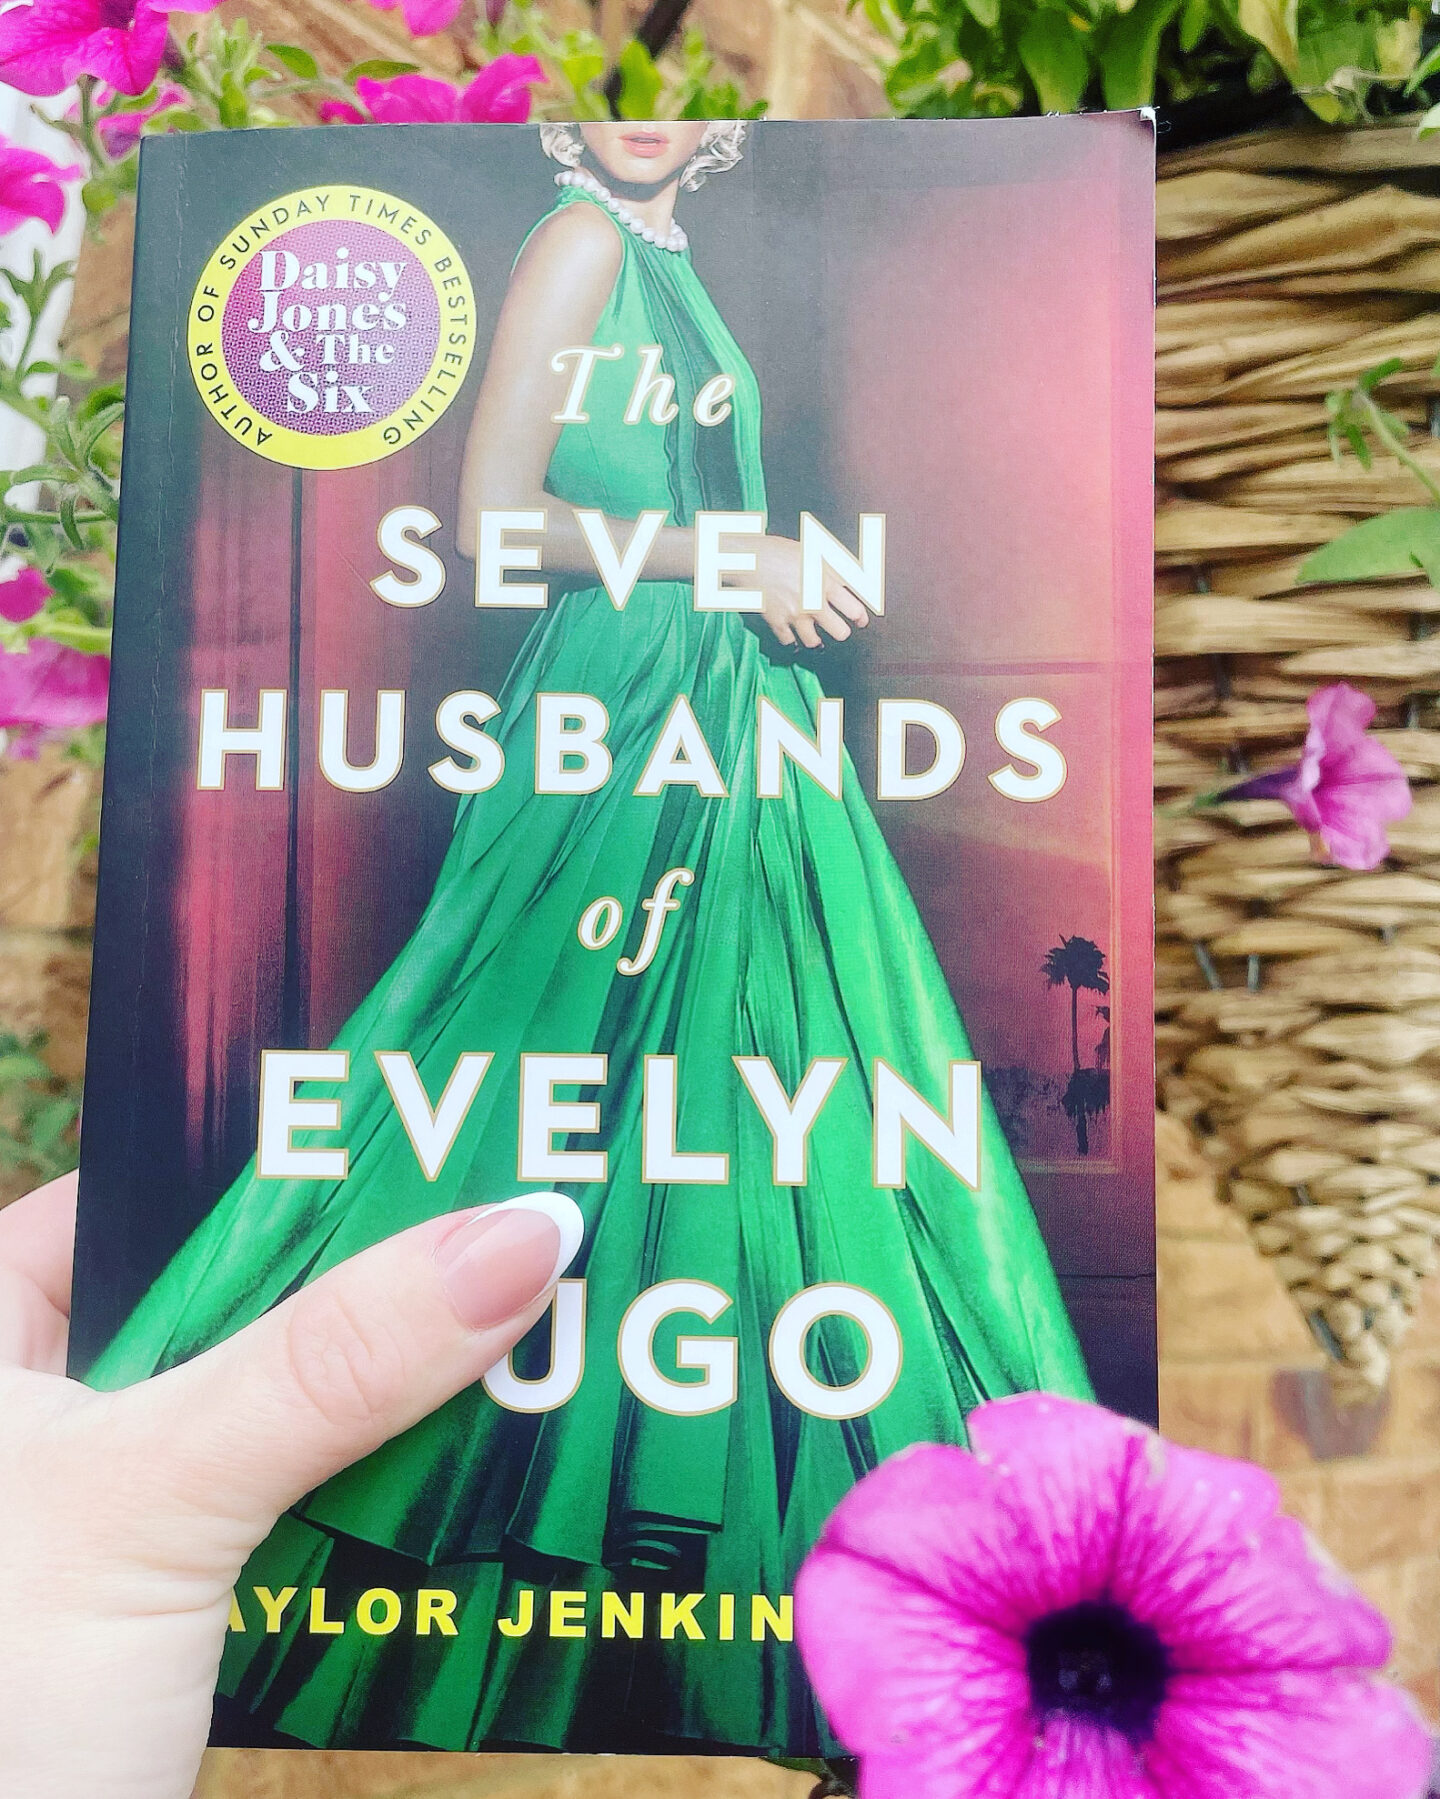 The Seven Husbands of Evelyn Hugo: A Spoiler-Free Review